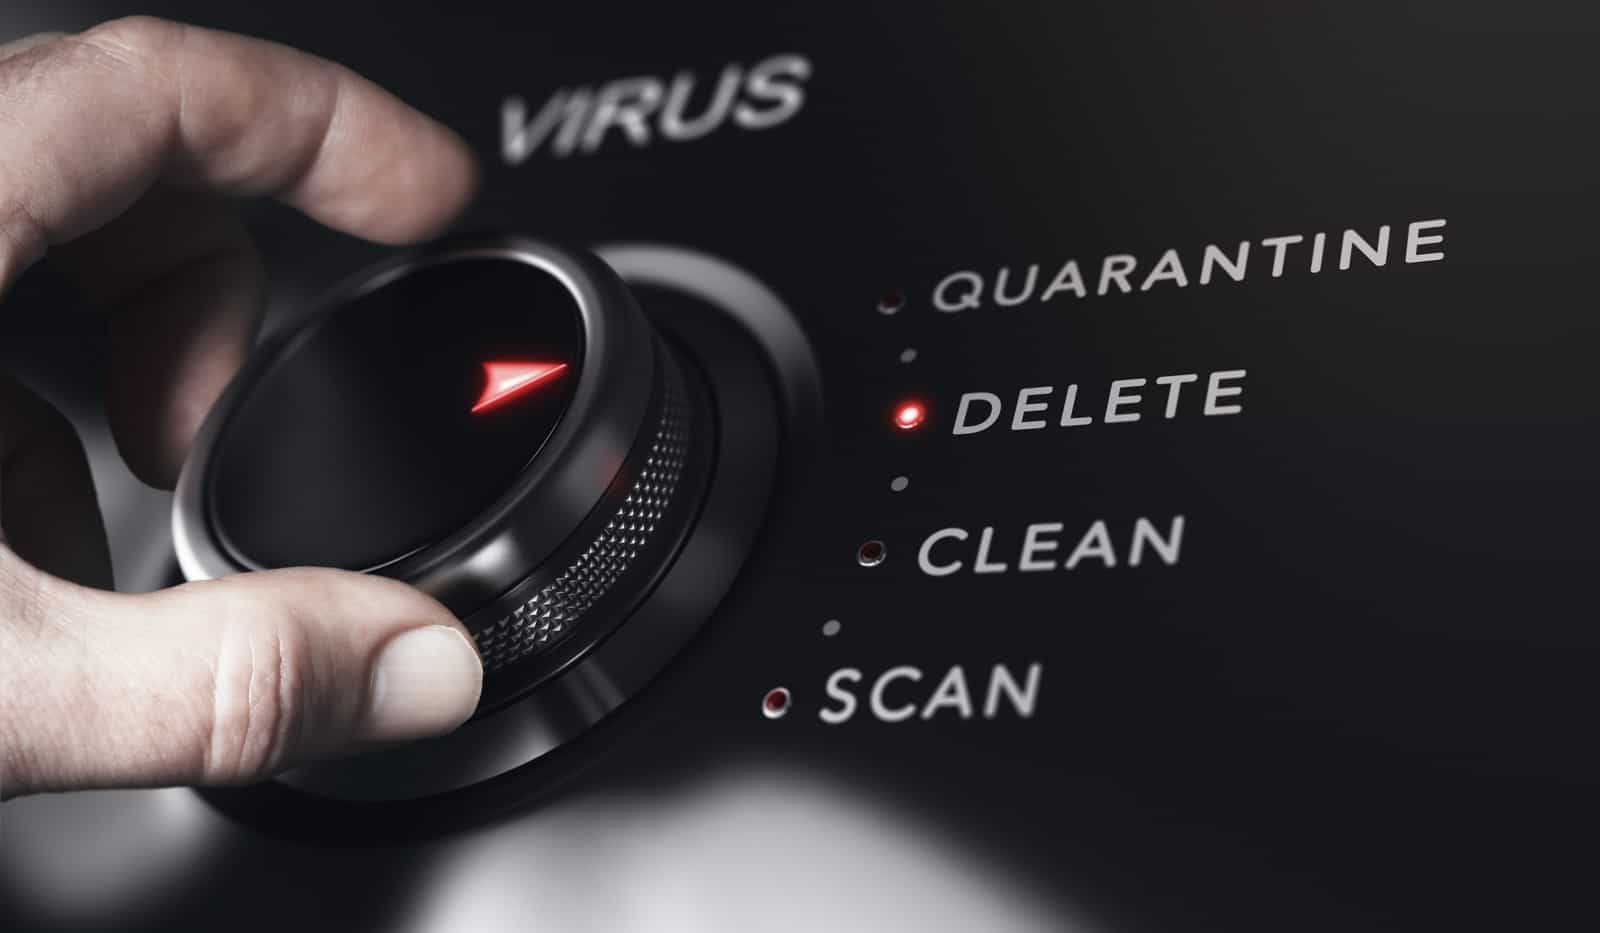 Malware, & Spyware Removal <img src="images/footer-logo.png" alt="Ben's Computer Repair Small Logo" style="width:50px;height:50px;">